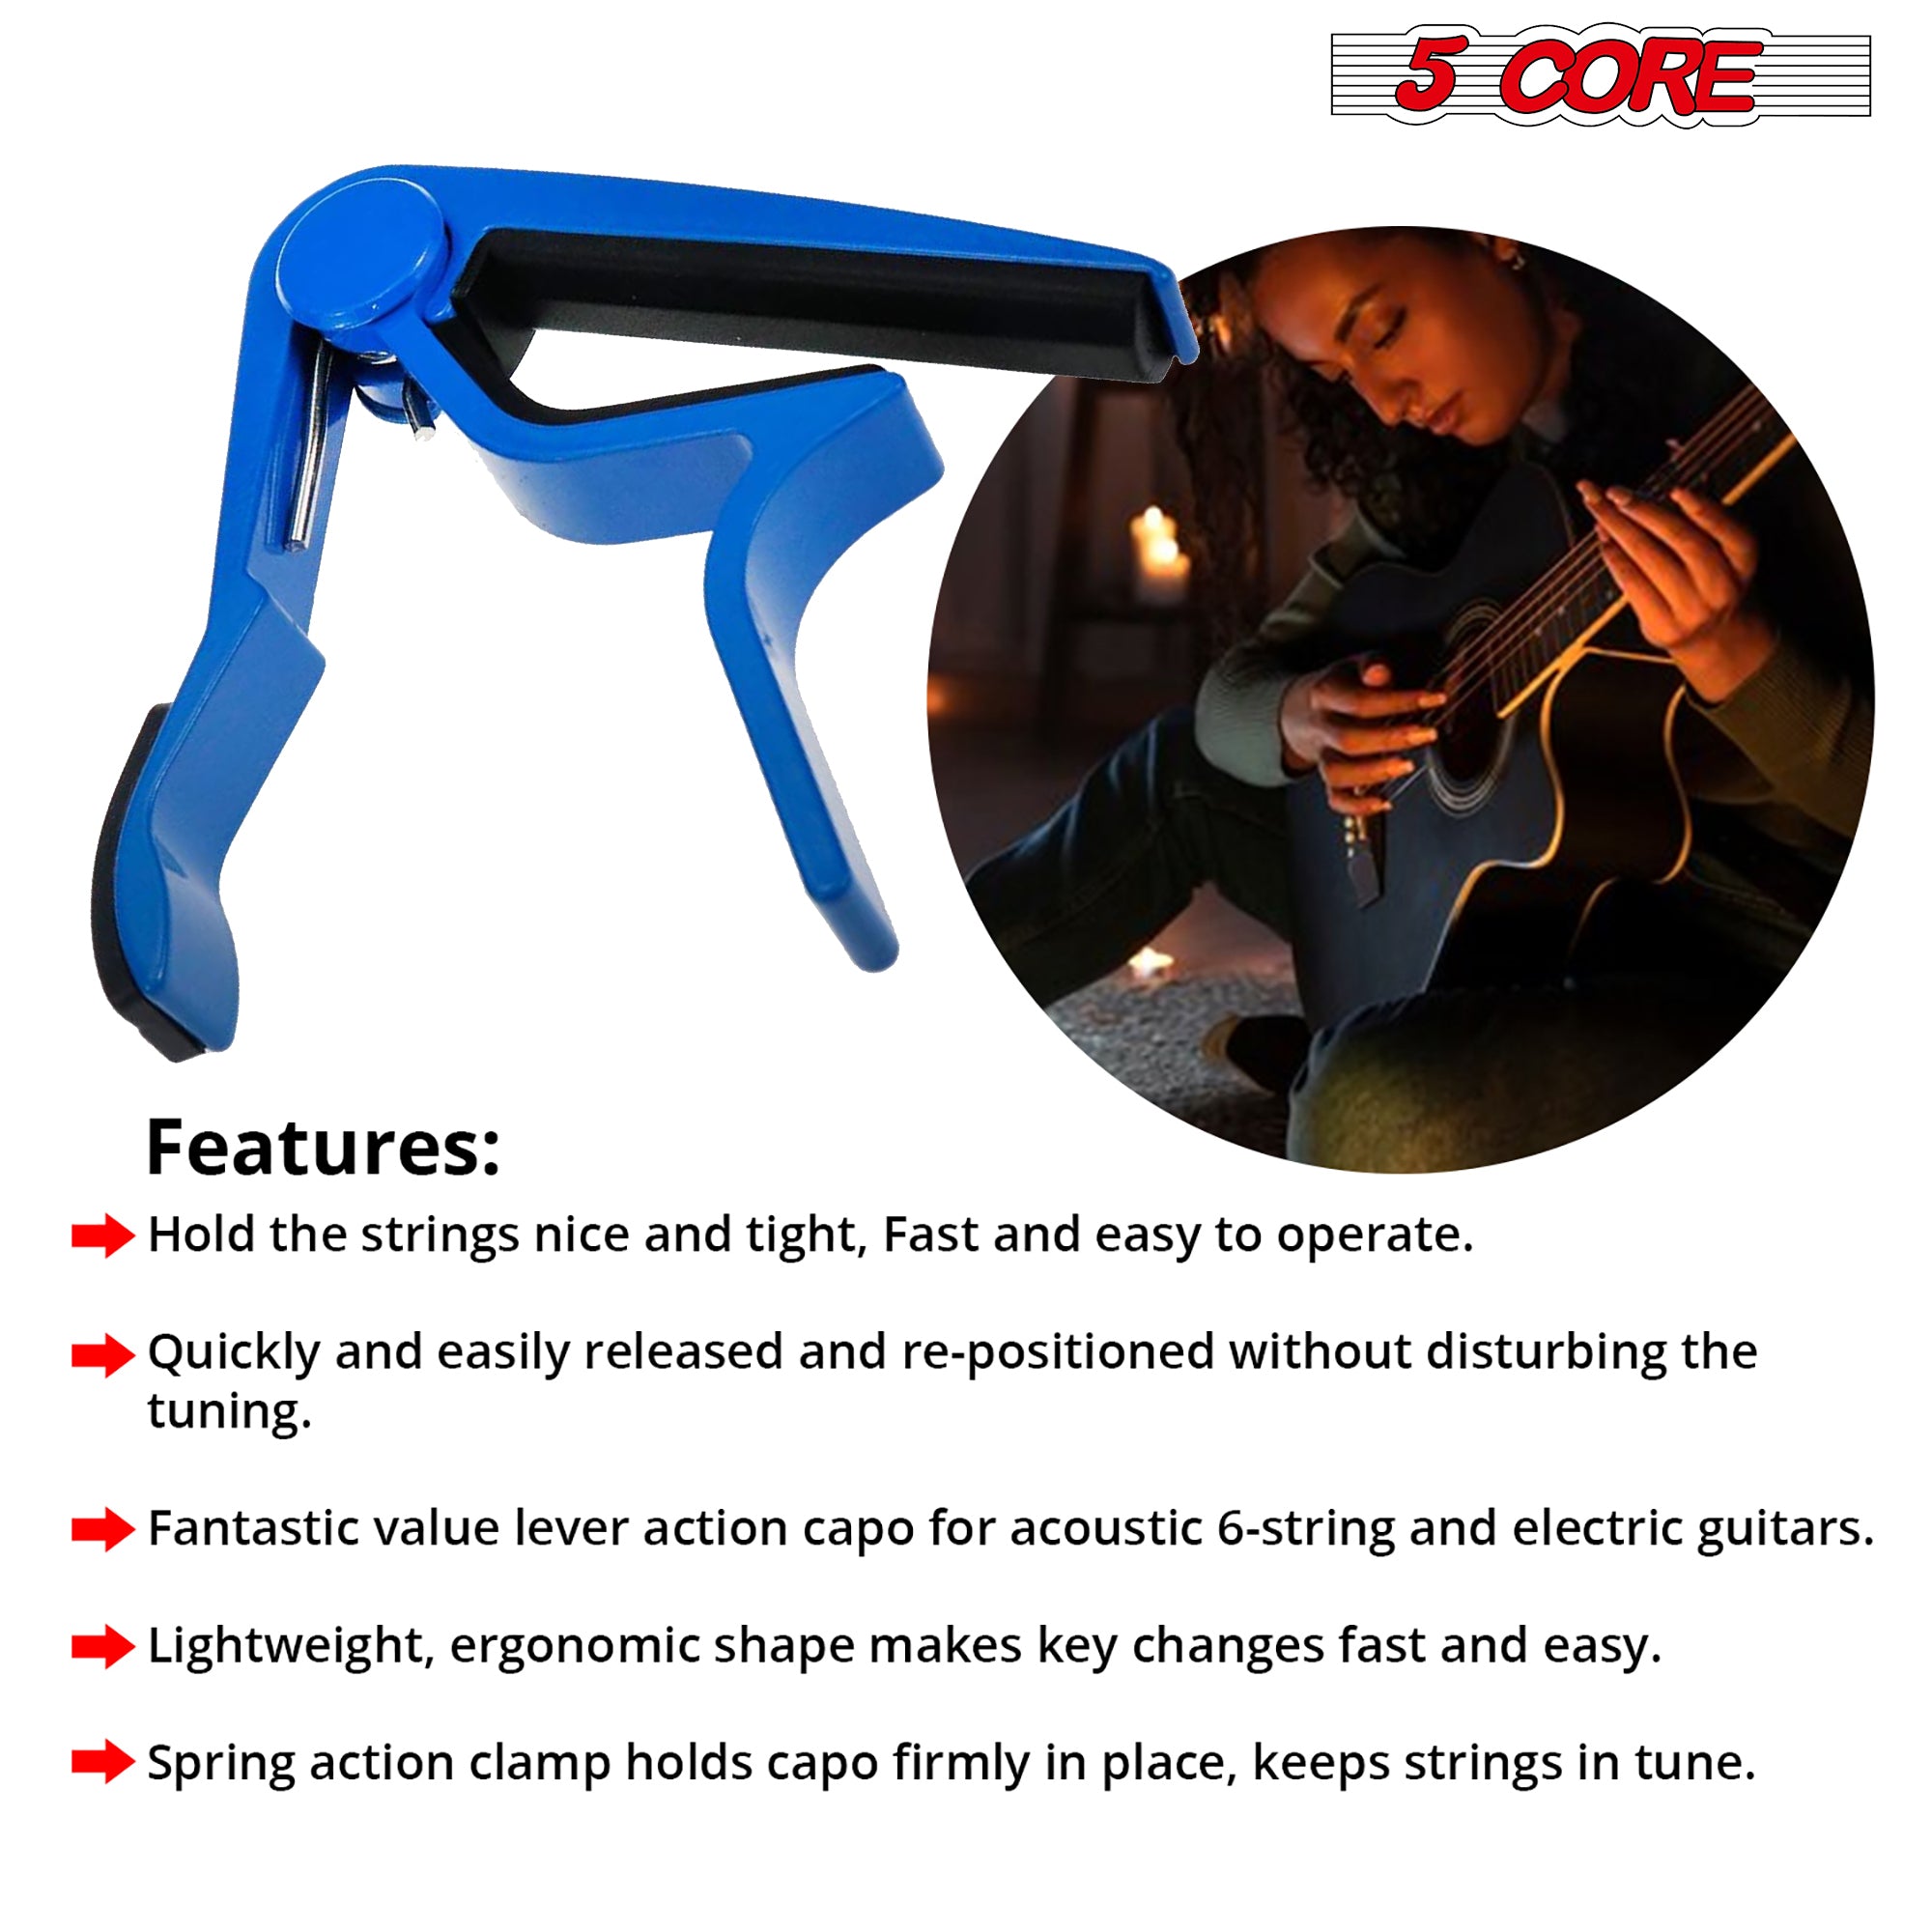 A sleek blue capo designed to fit snugly on various guitar necks, enhancing performance